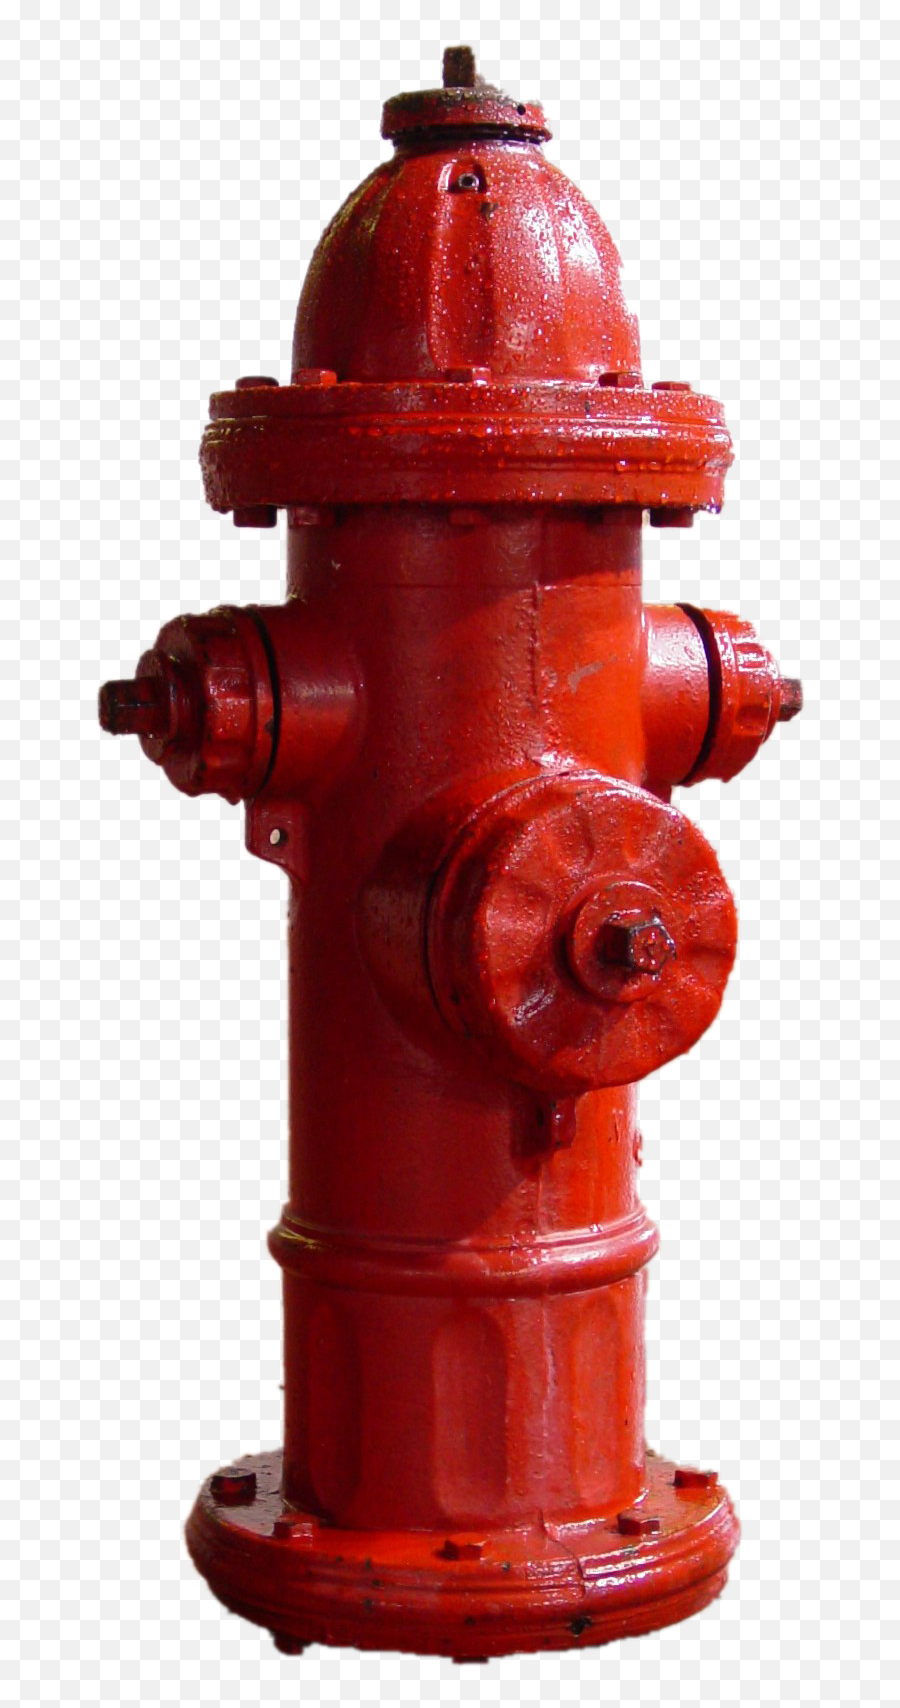 Fire Hydrant Png Images Transparent Background Play - Transparent Fire Hydrant Png,Fire Transparent Background